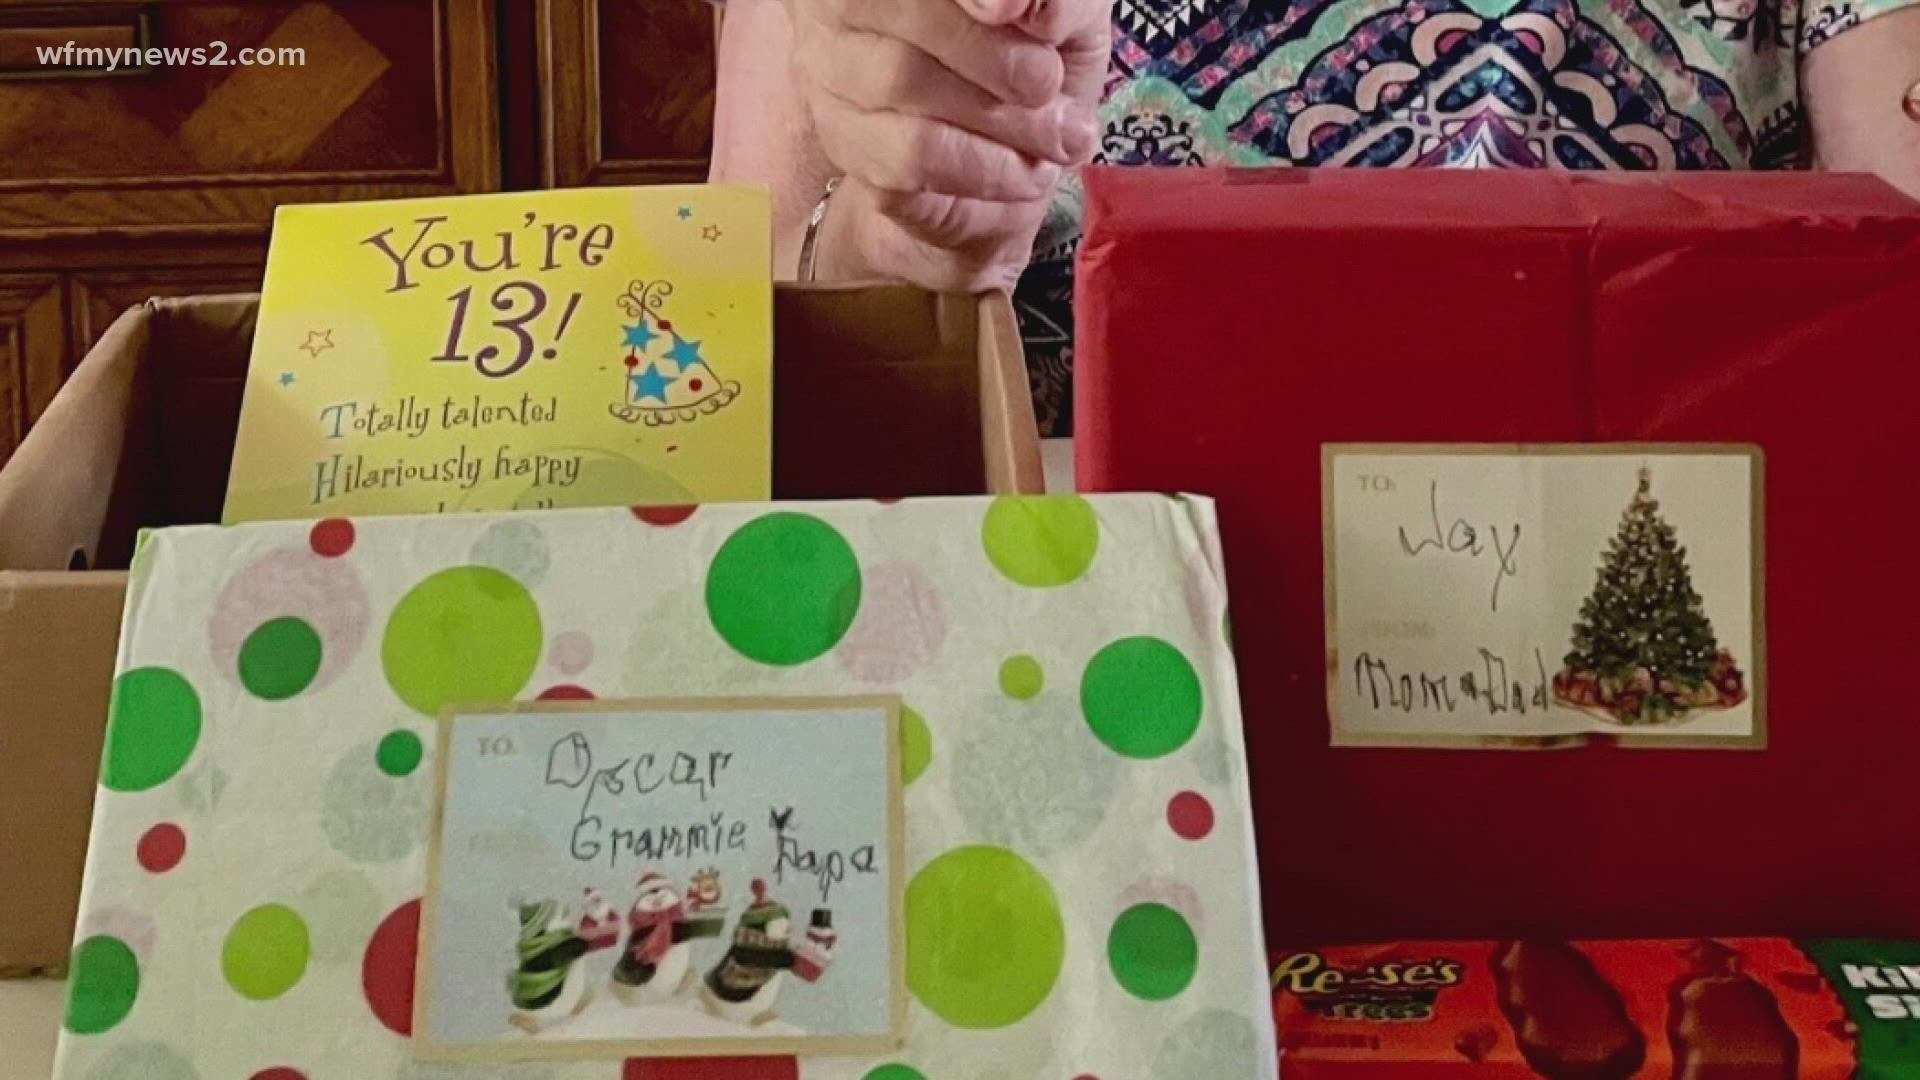 The package had a gift for her granddaughter inside, and it took months to finally get to its destination.